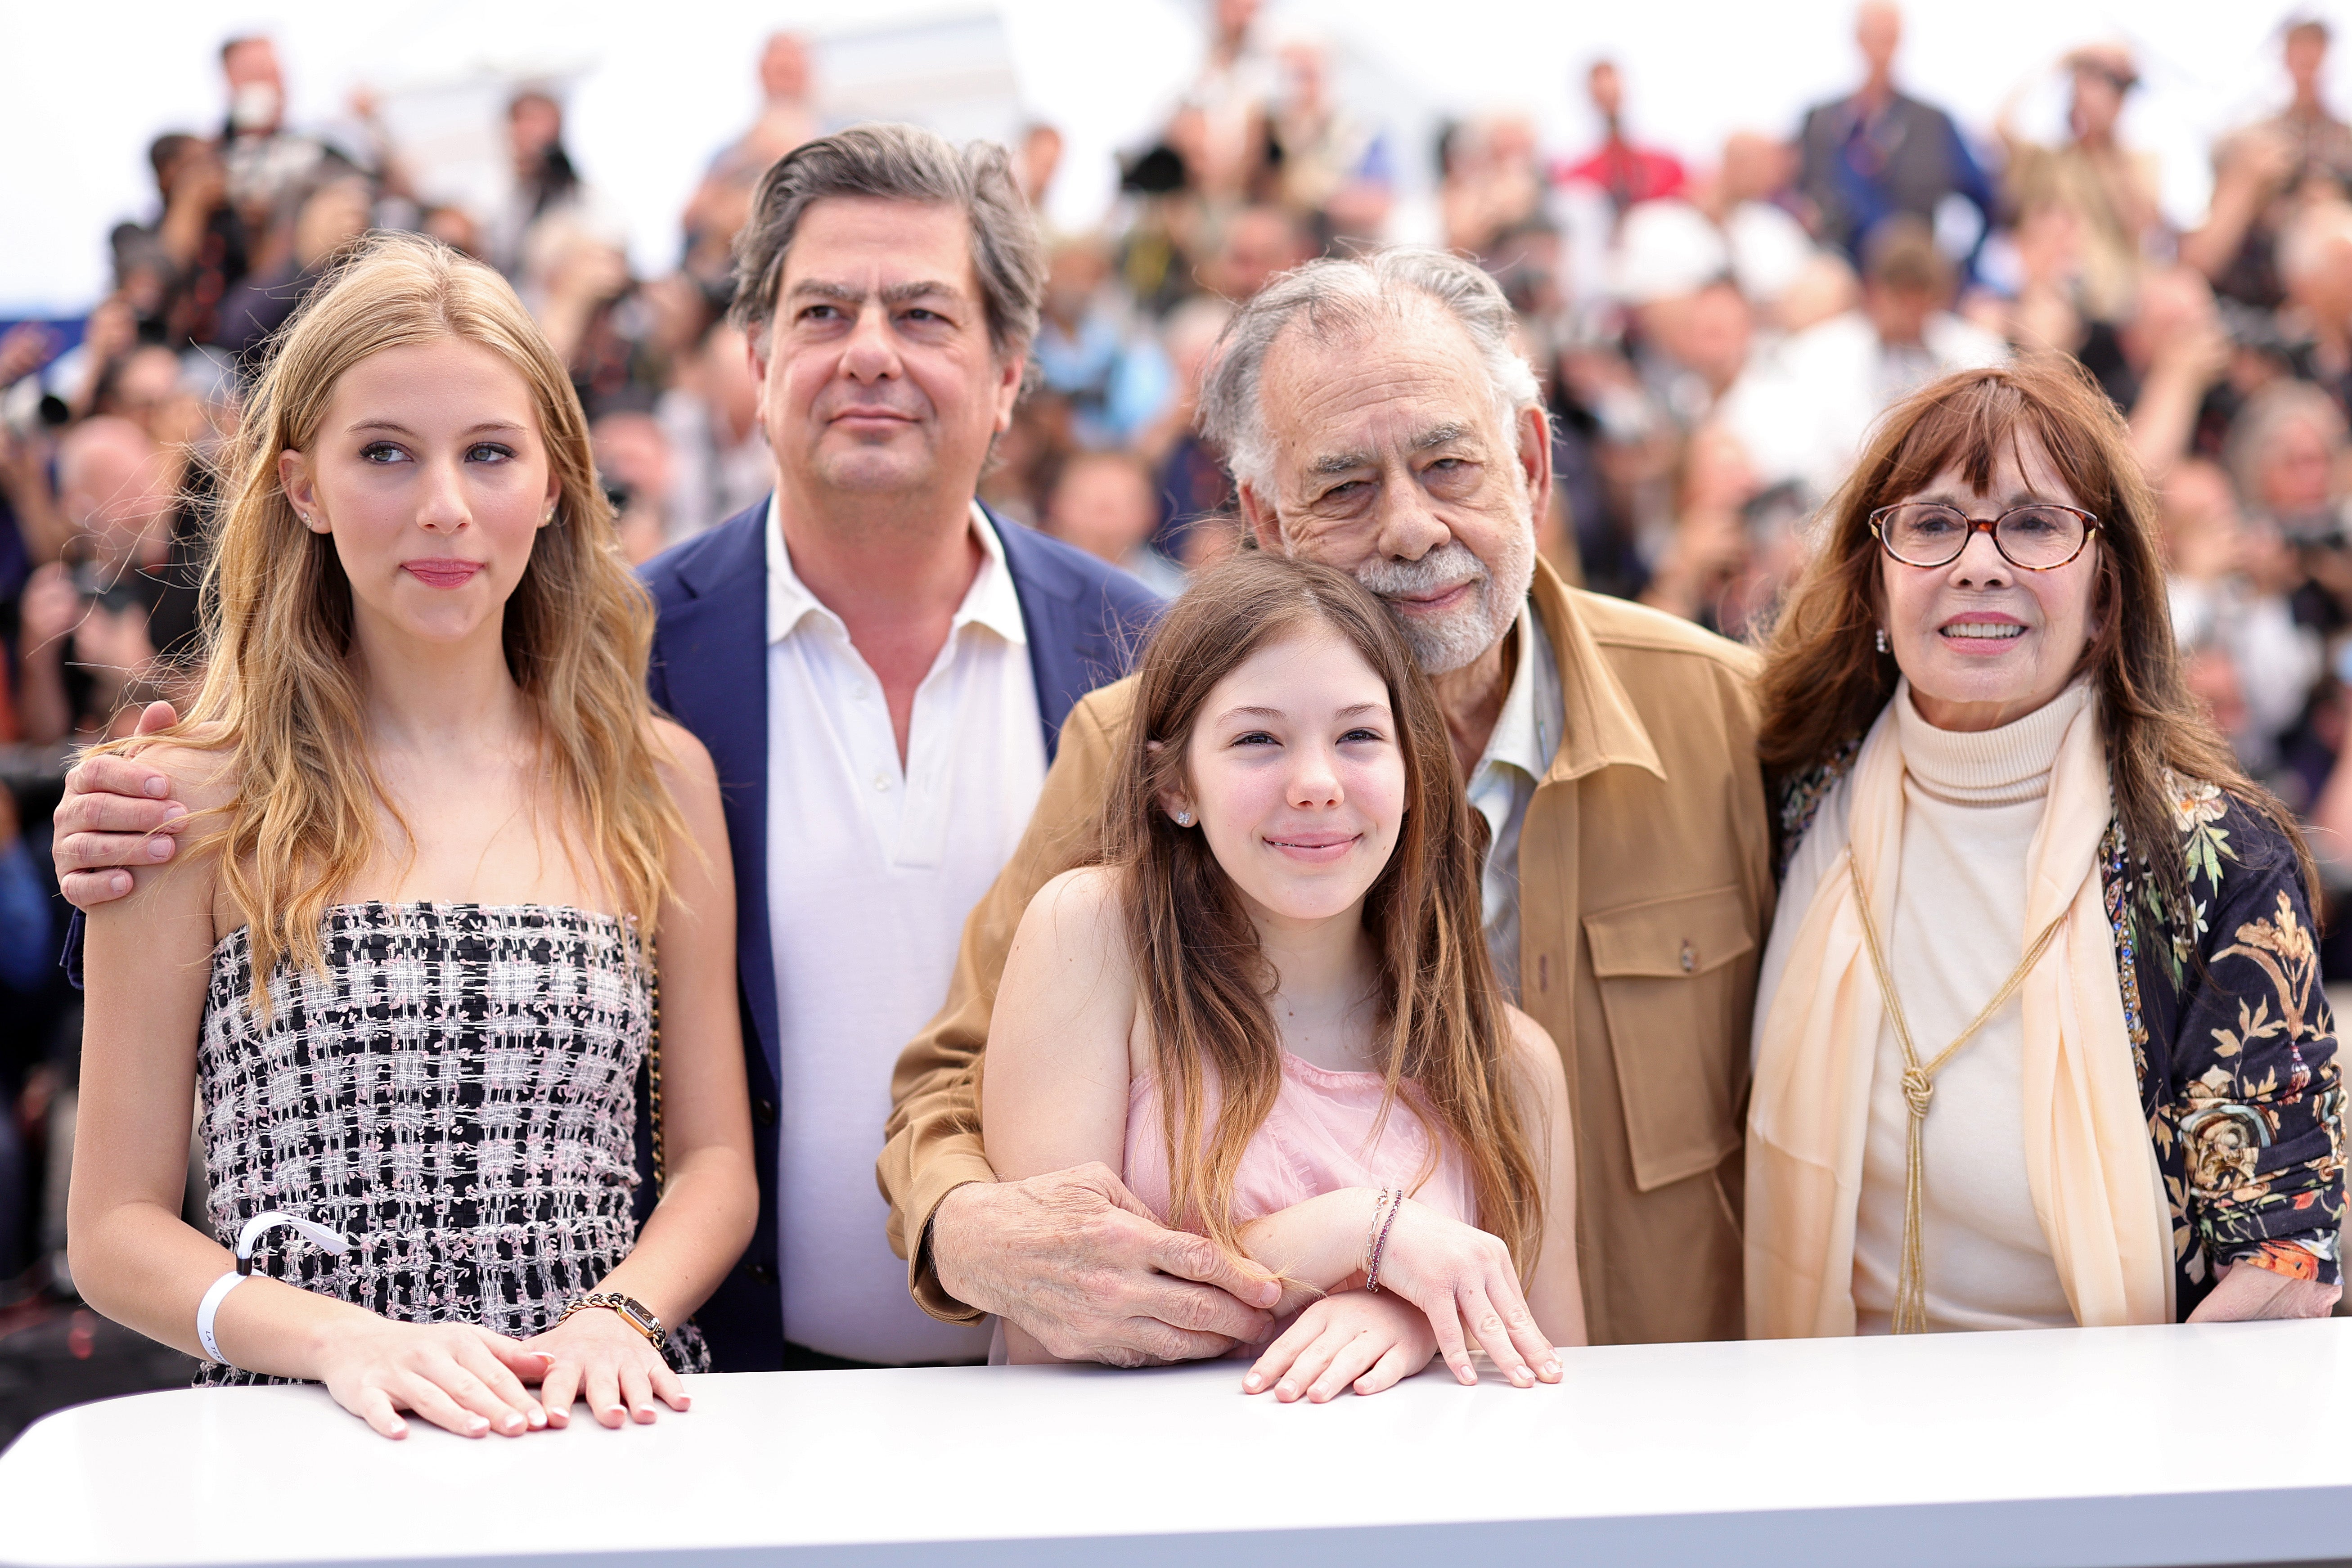 Romy Croquet, Roman Coppola, Cosima Mars, Director Francis Ford Coppola and Talia Shire in Cannes for ‘Megalopolis’